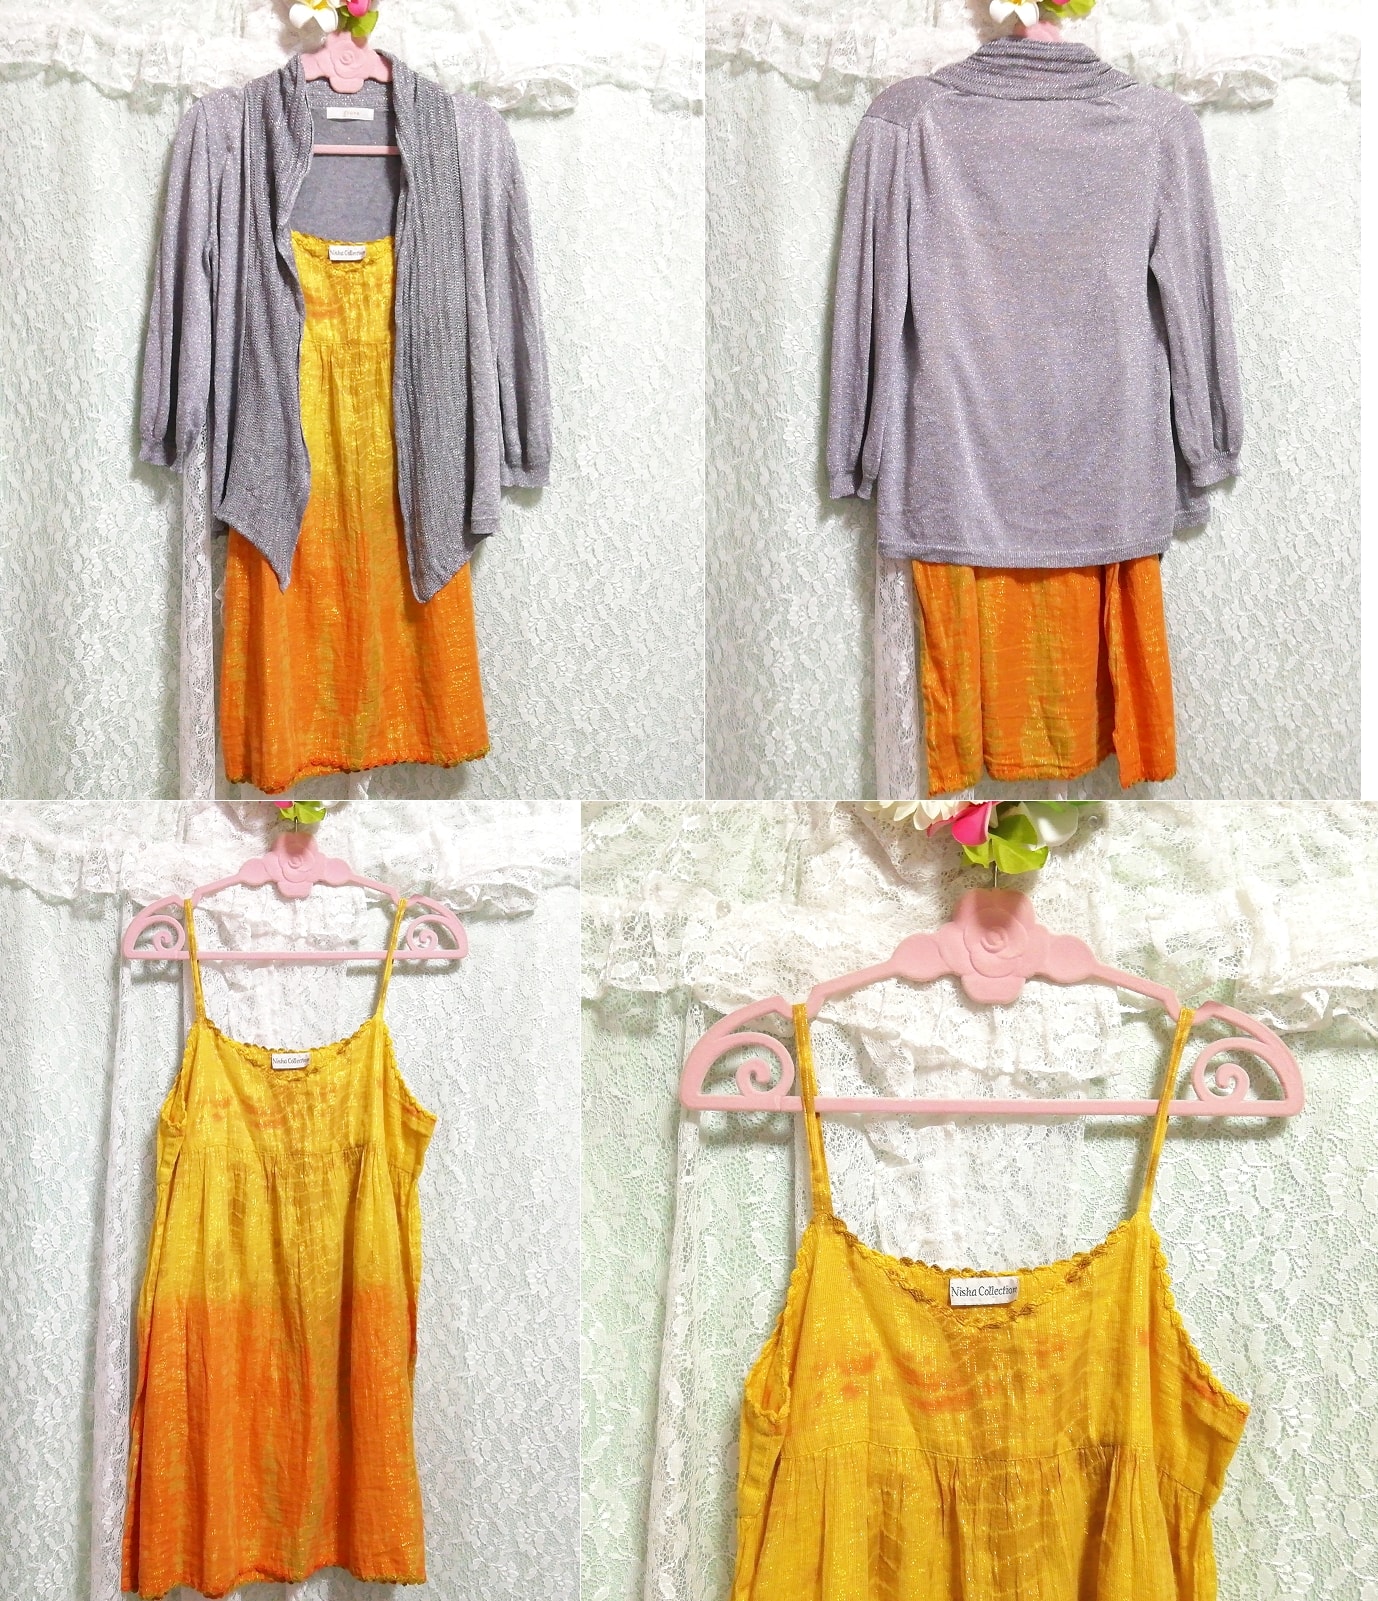 Colorful negligee nightgown gray lame gown yellow camisole babydoll dress 2P, fashion, ladies' fashion, camisole